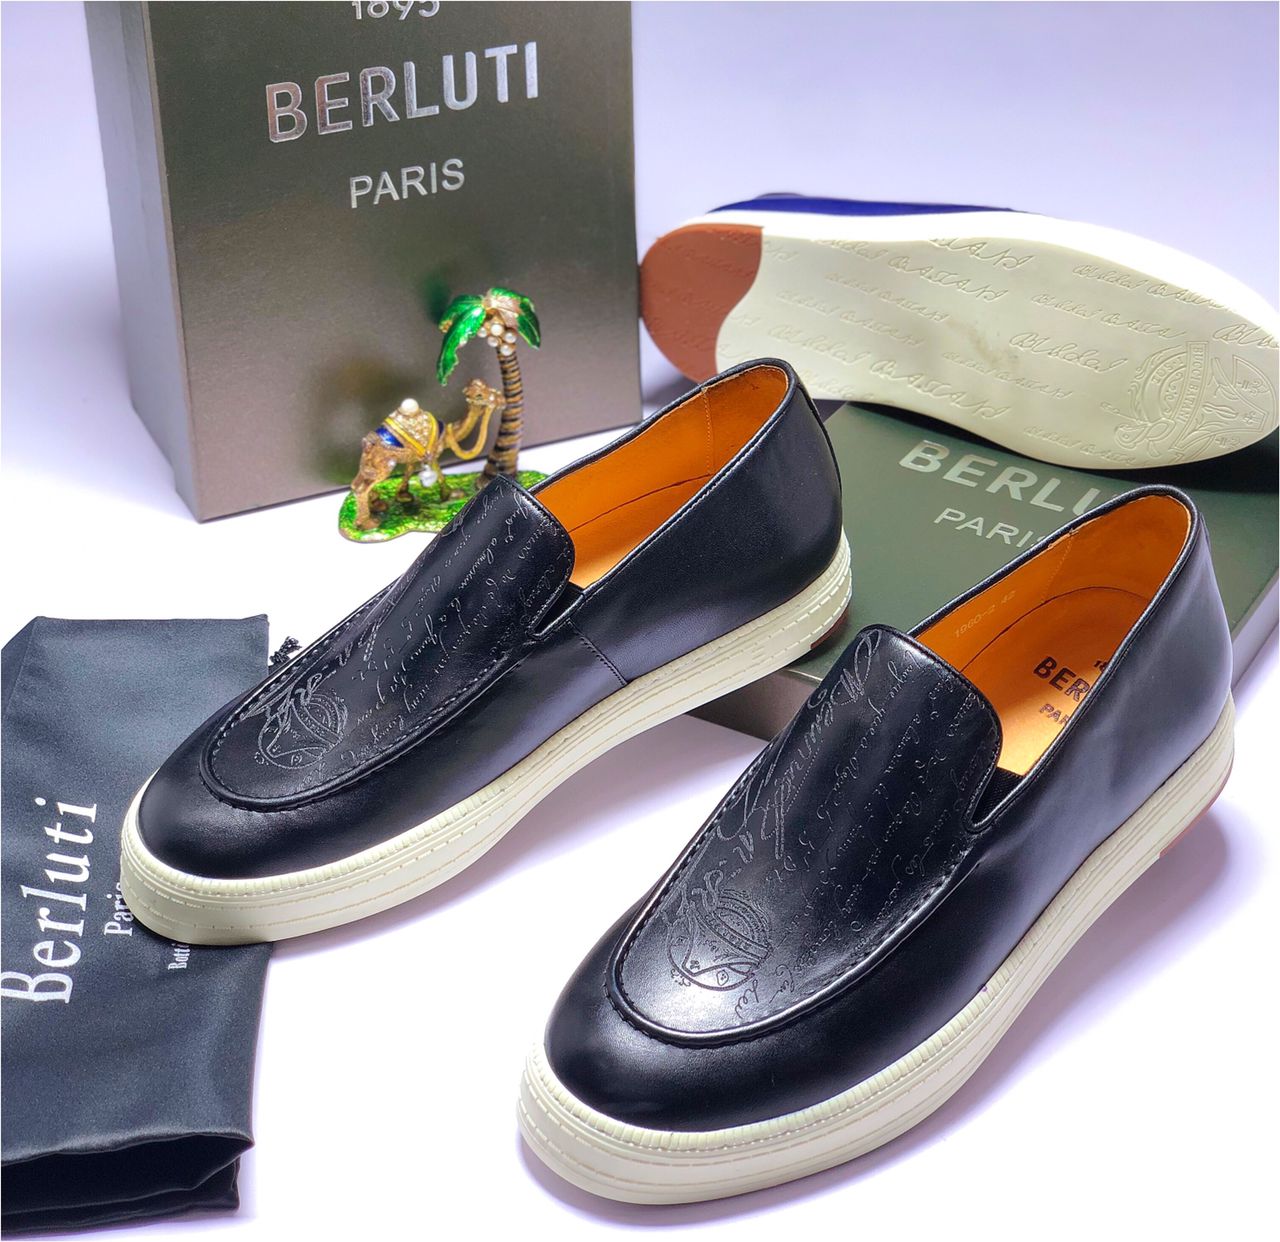 HIGH QUALITY MENS LUXURY PLIMSOLL LOAFERS for CartRollers Marketplace For Shopping Online, Fashion, Electronics, Phones, Computers and Buy Men Shoe, Home Appliances, Kitchen-wares, Groceries Accessories, ankara, Aso-Ebi, Beads, Boys Casual Wears, Children Children's Wears ,Corporate Shoes, Cosmetics Dress ,Dresses Fashion, Girls' Dresses ,Girls' Wears, Hair Care ,Jewelries ,Jewelry Kids, Kids' Fashion Ladies ,Wears Lapel Pins, Loafers Shoe Men ,Men's Caftan, Men's Casual Shoes, Men's Fashion, Men's Shoes, Men's Wears, Moccasin Shoe, Natural Hair, In Lagos Nigeria